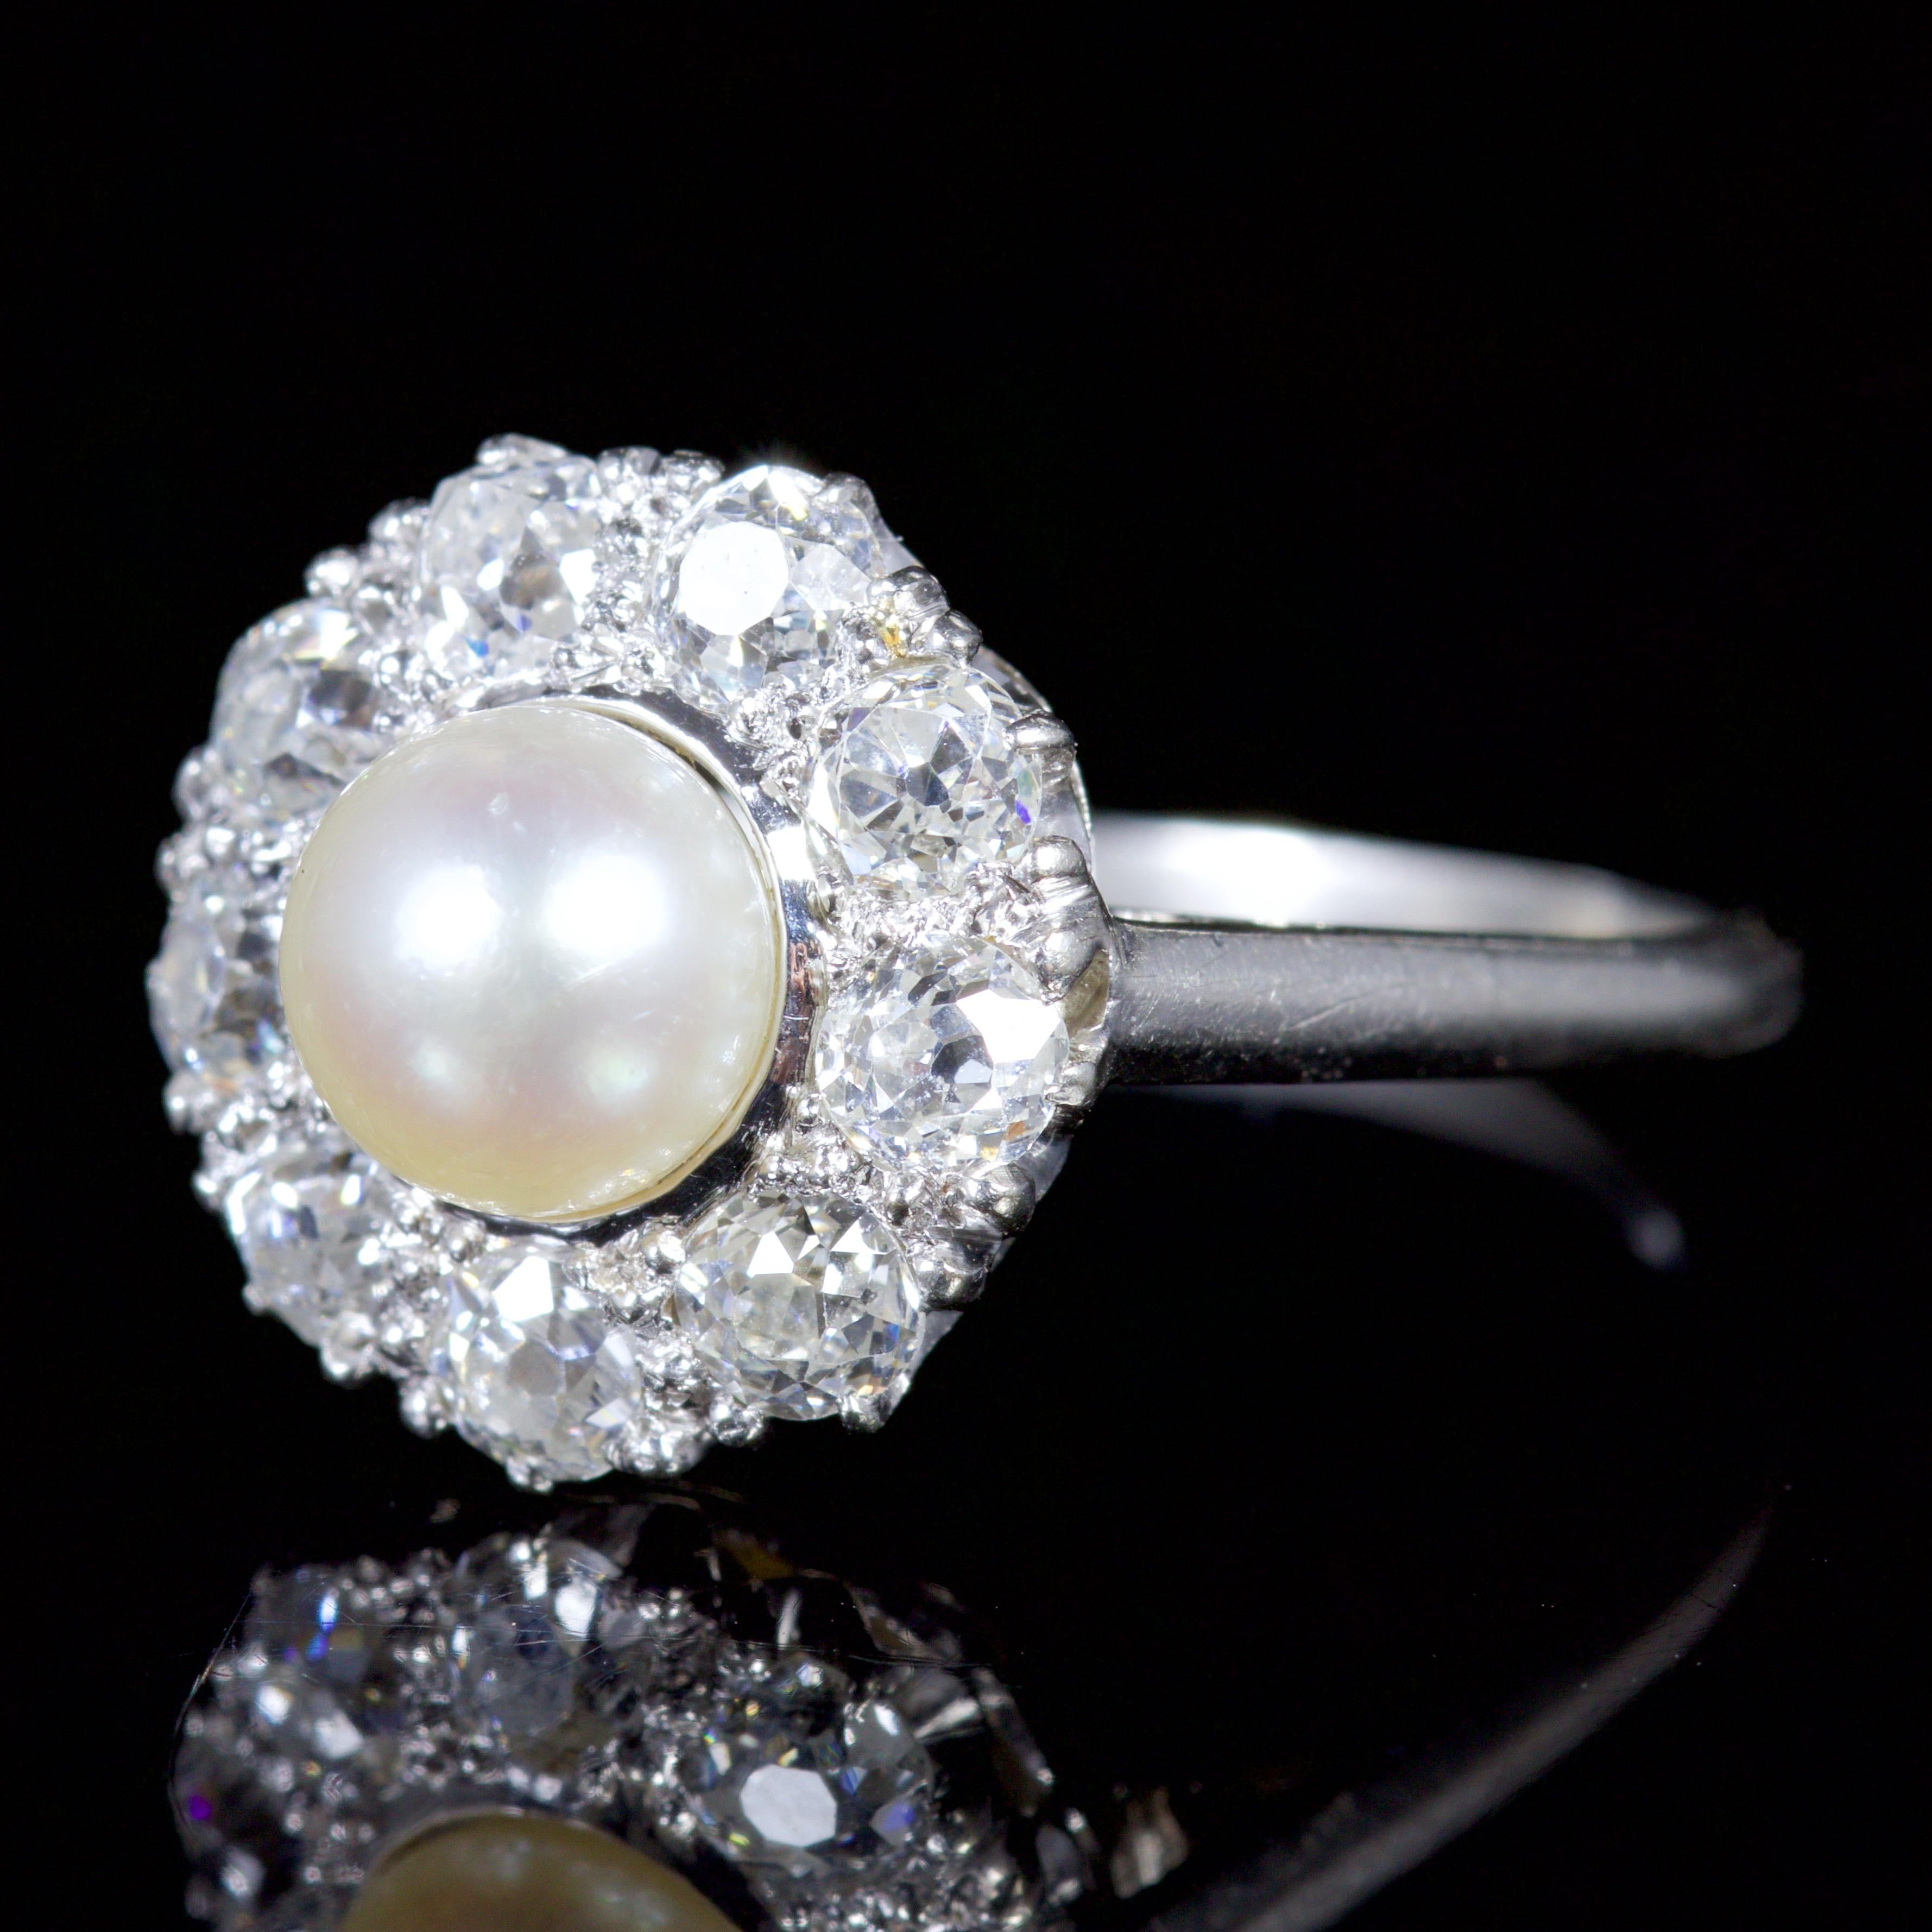 This outstanding Edwardian all platinum Diamond and Pearl ring is Circa 1915.

The elegant ring is beautifully designed, with a rich creamy Pearl in the centre and a halo of glistening Diamonds surrounding it.

It is set with over 1ct of Diamonds